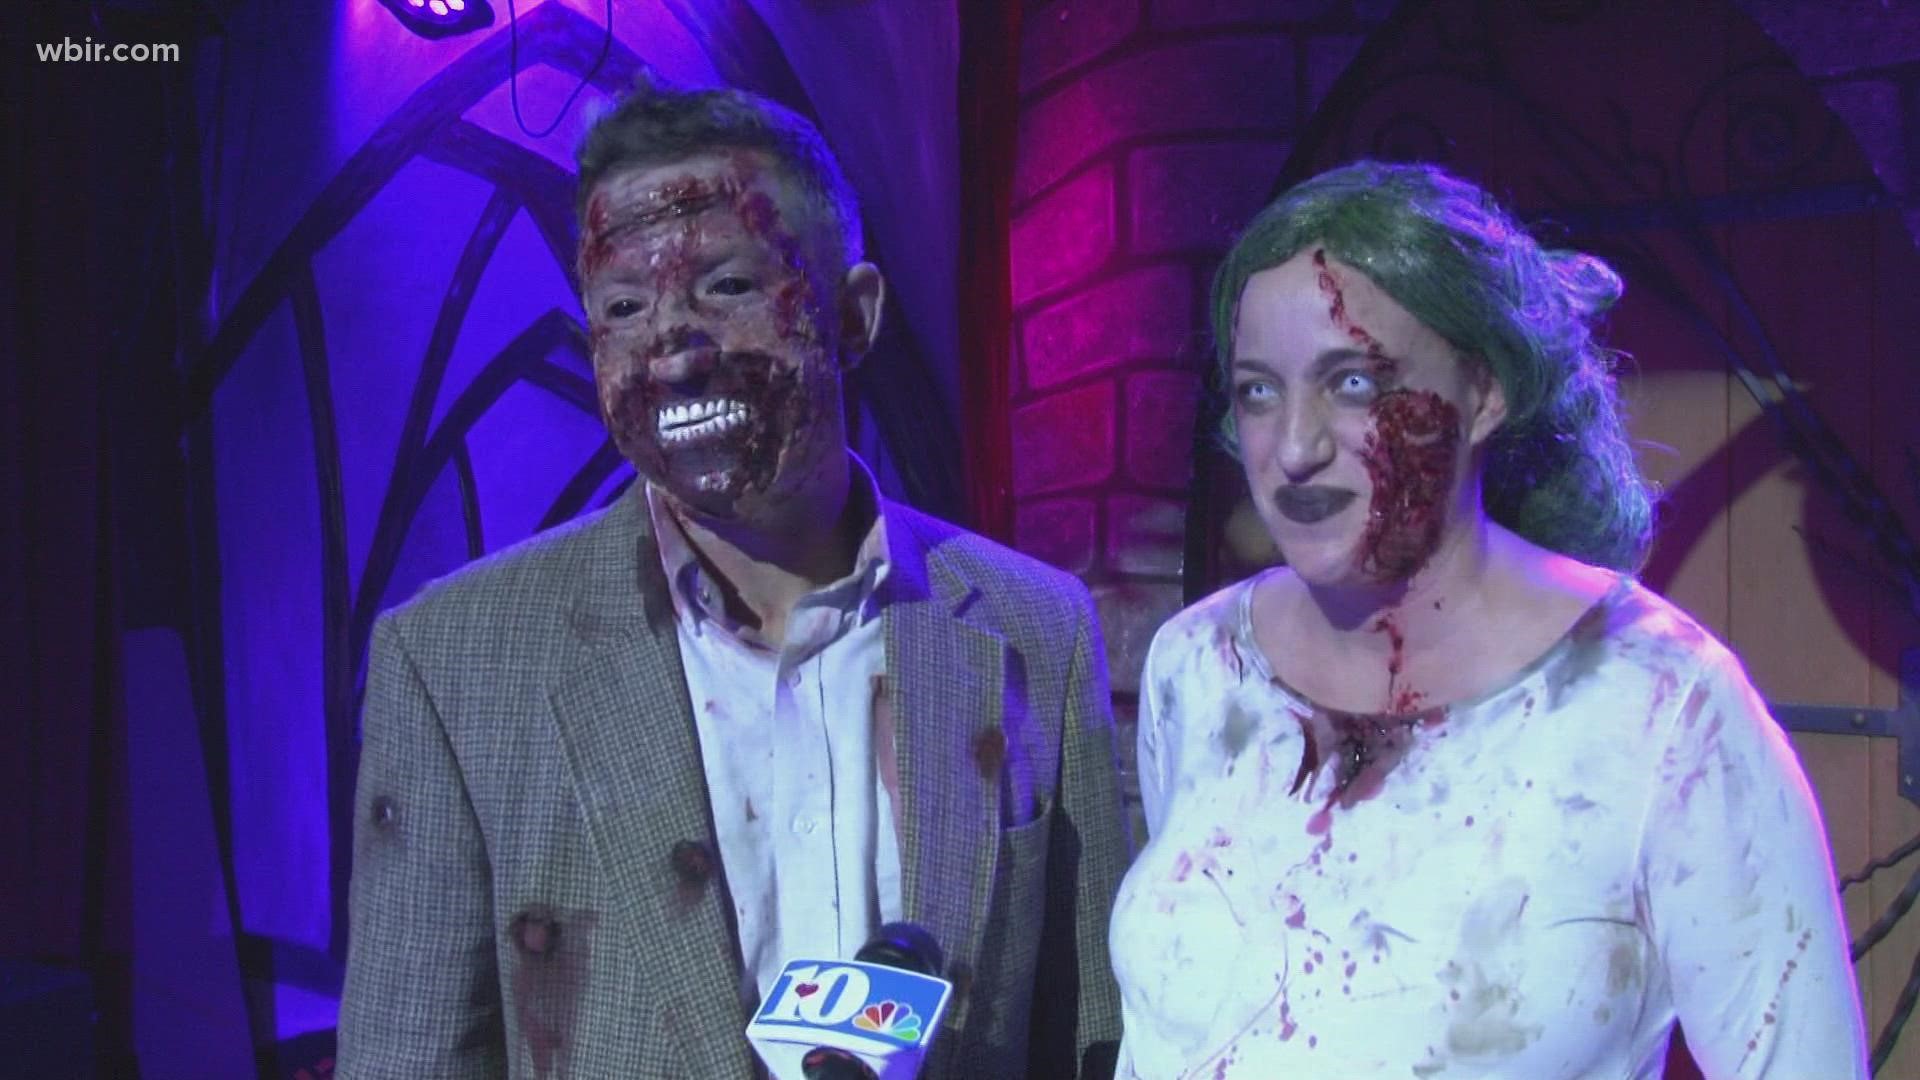 During the event, participants dressed up as zombies and march through downtown Knoxville. A makeup artist will be available to transform the living into the undead.